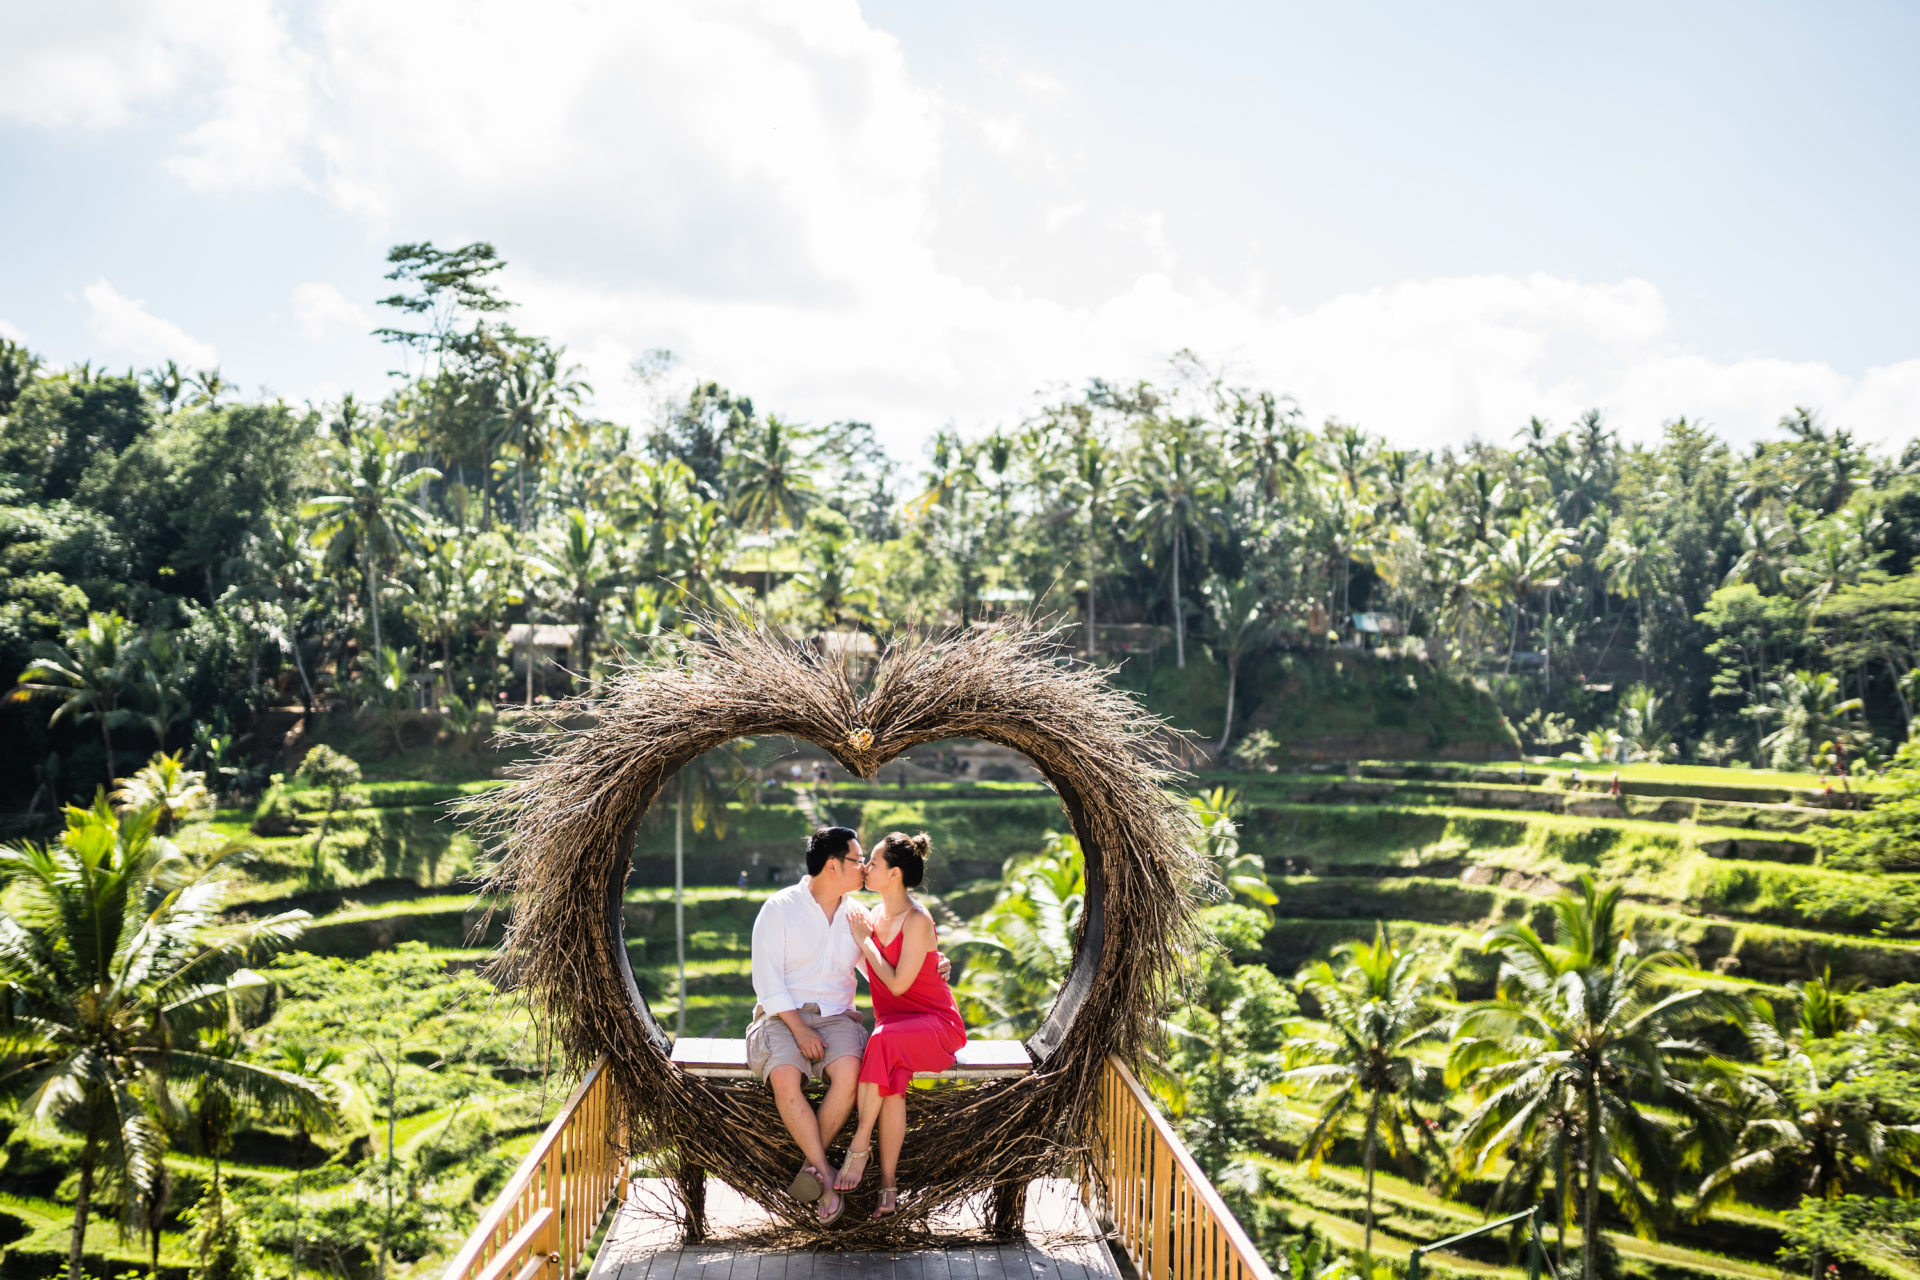 7 Reasons Why You Should Book Bali For Your Next Trip